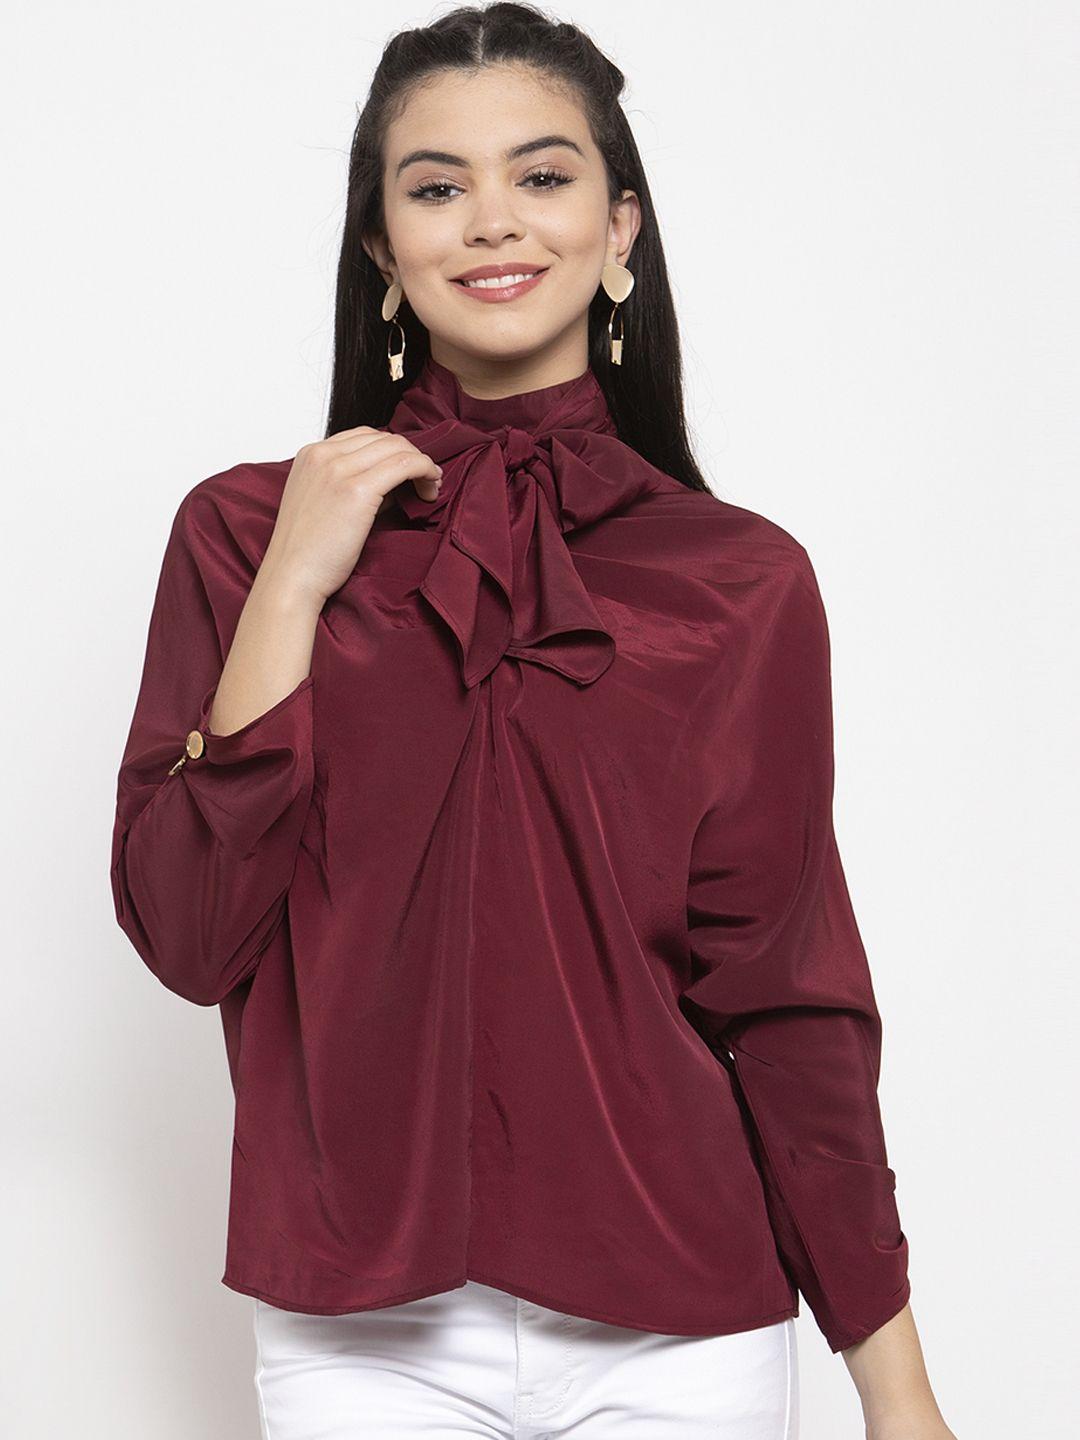 kassually women maroon solid top with tie up neck